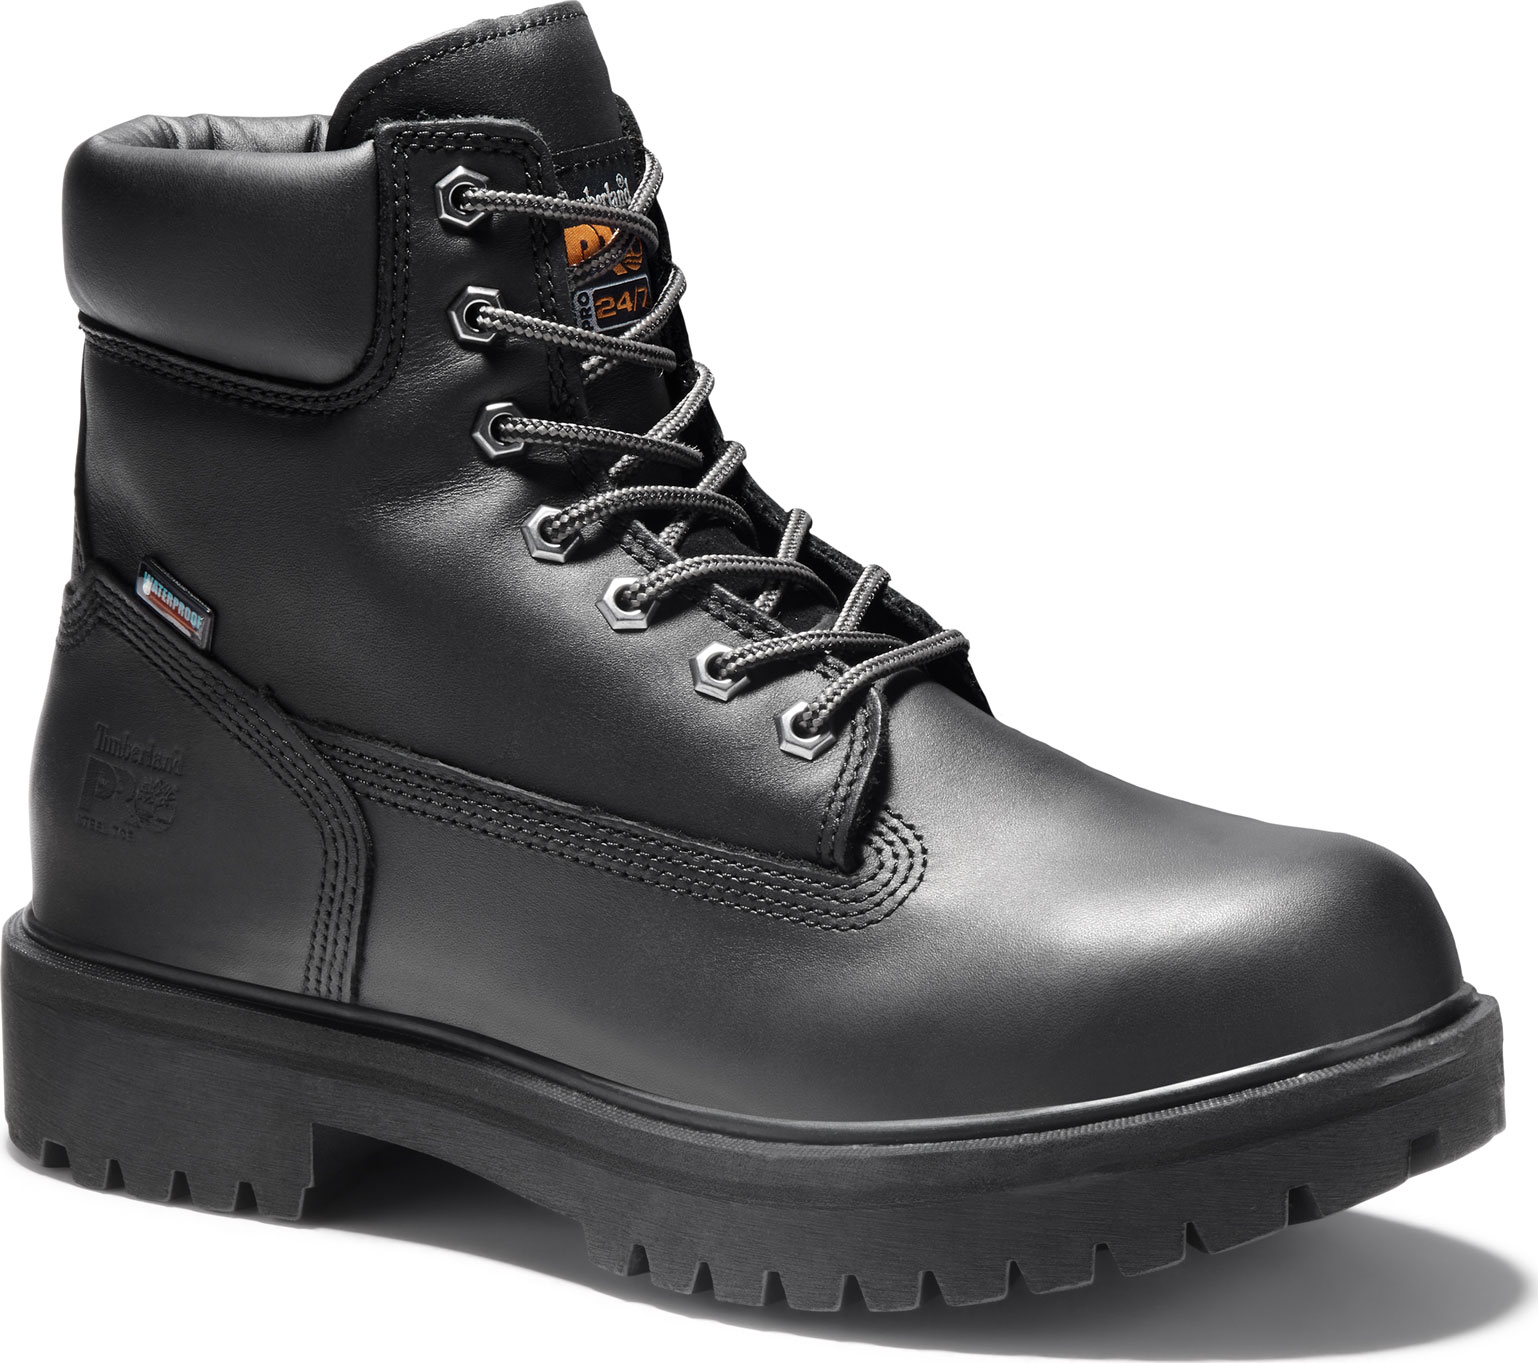 Safgard :: Work Boots, Safety Shoes, Steel Toe, Waterproof, Safety Footwear,  Bates, Boots, ANSI & ASTM